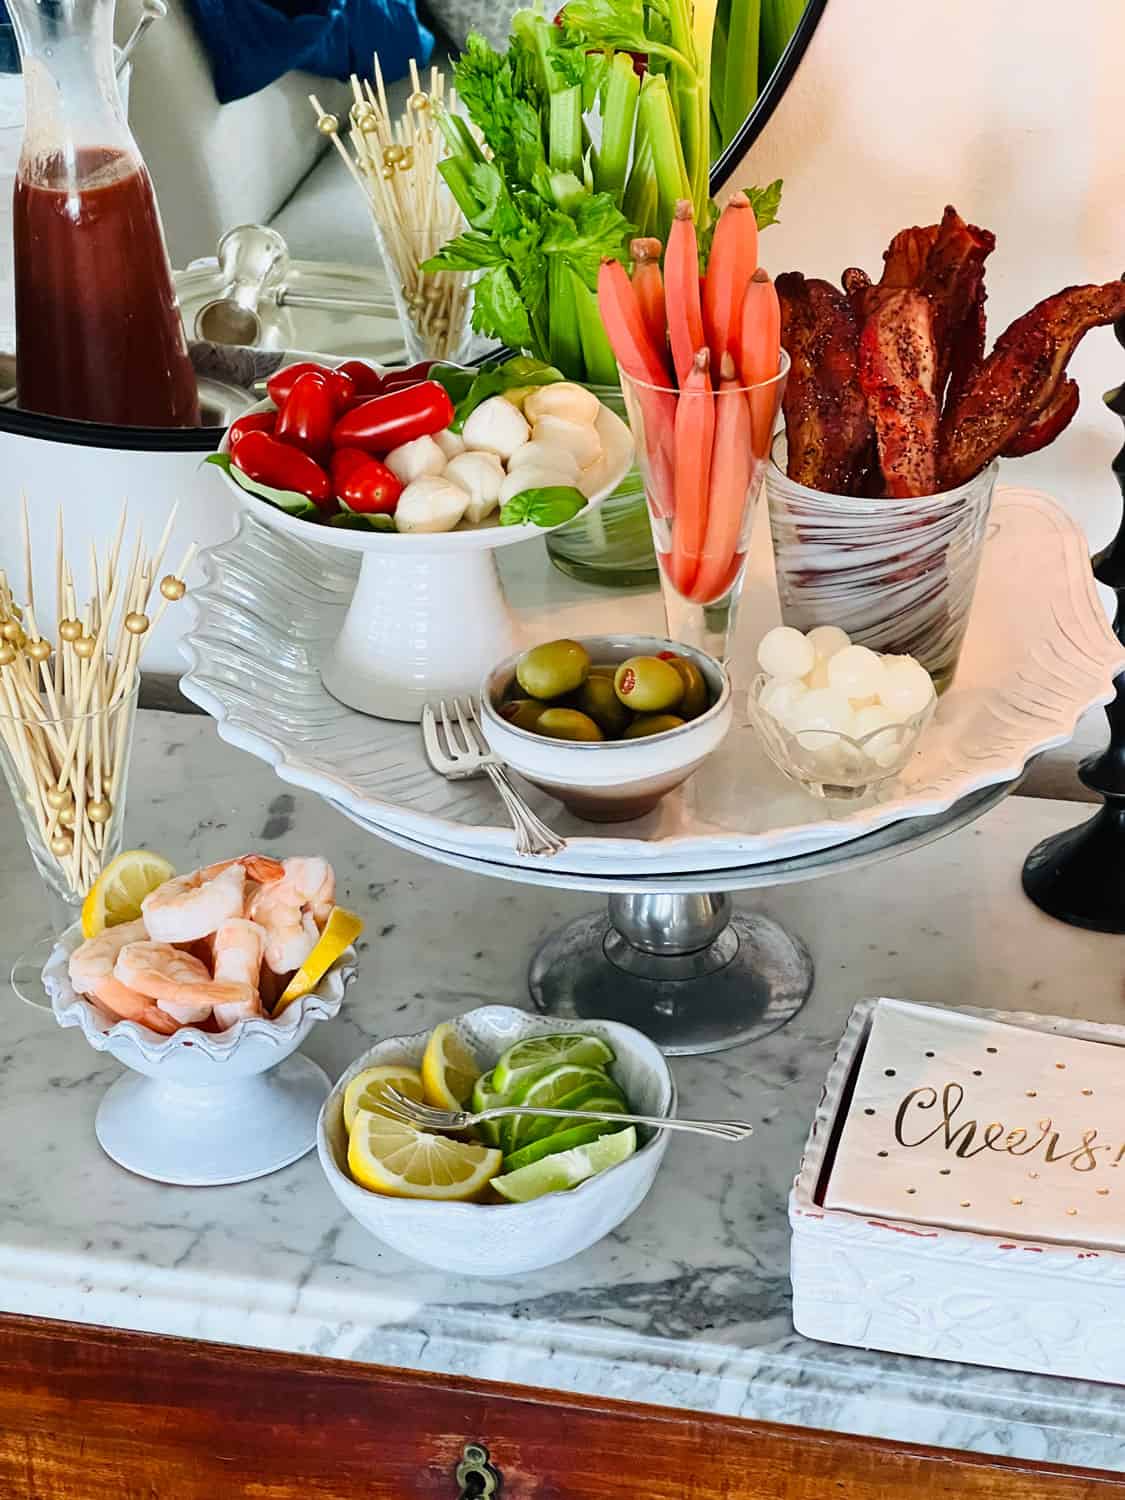 Crispy bacon, celery stalks, carrots, olives, grape tomatoes, cocktail onions for Bloody Mary Bar